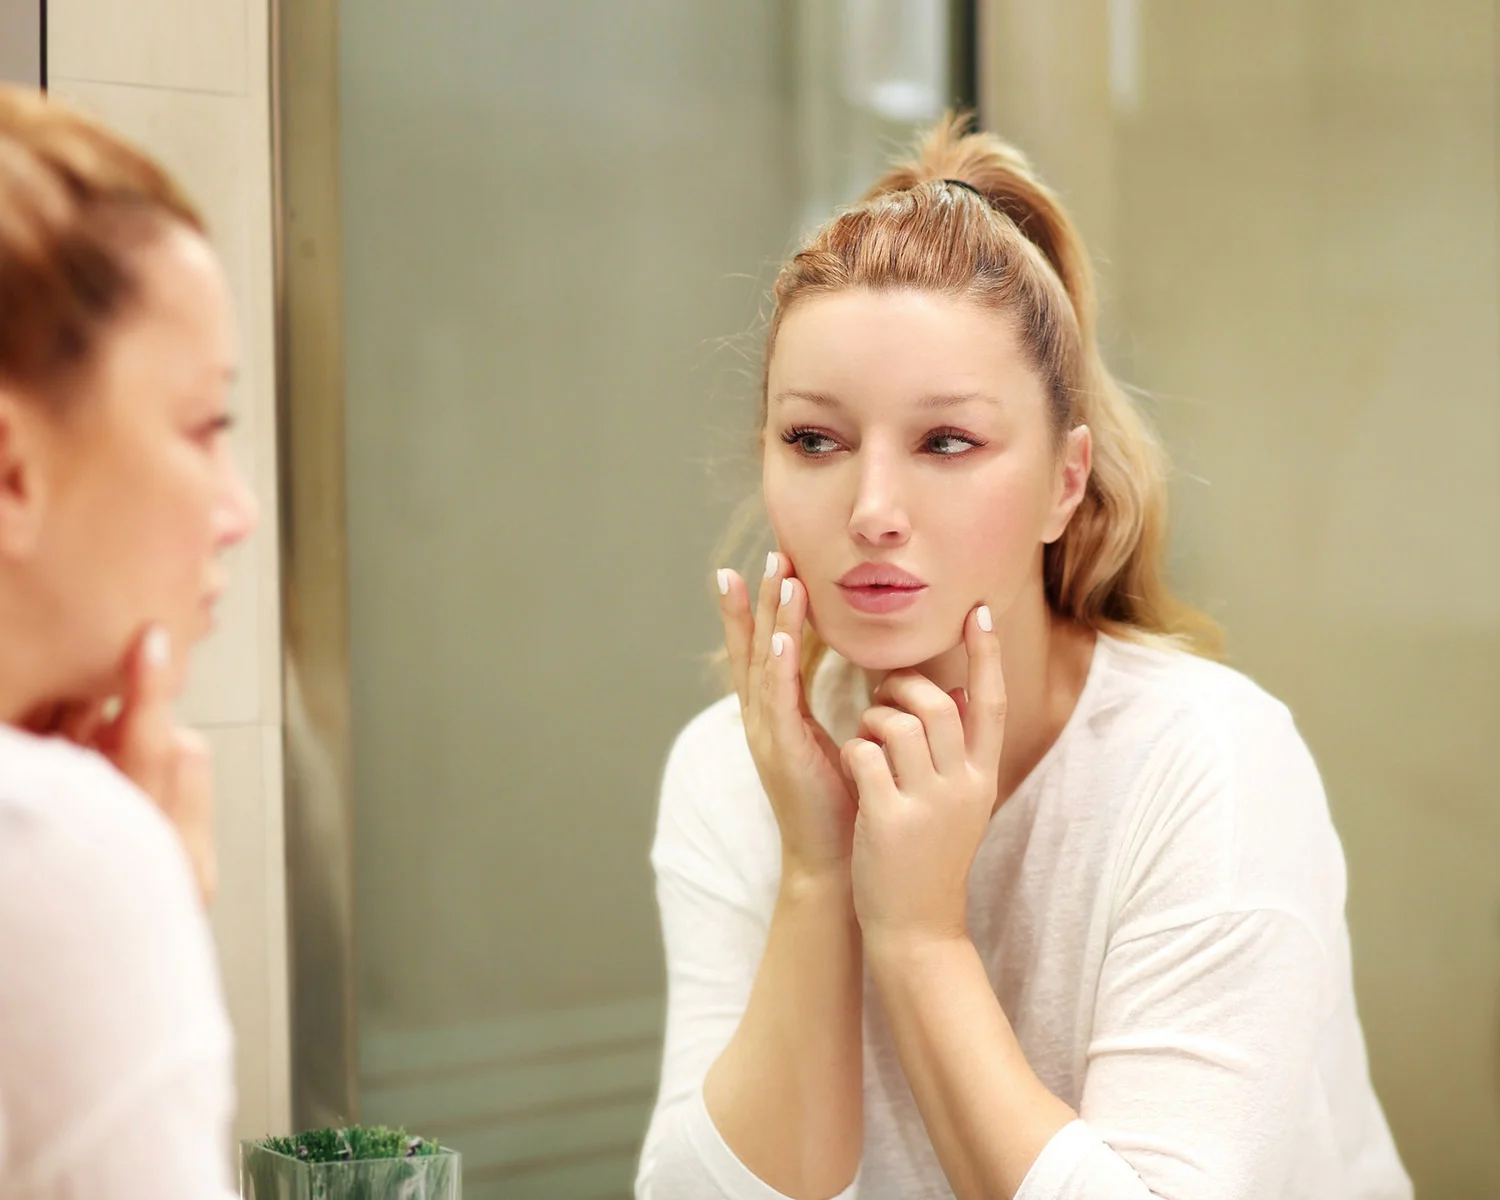 Woman inspecting her facial skin in the mirror